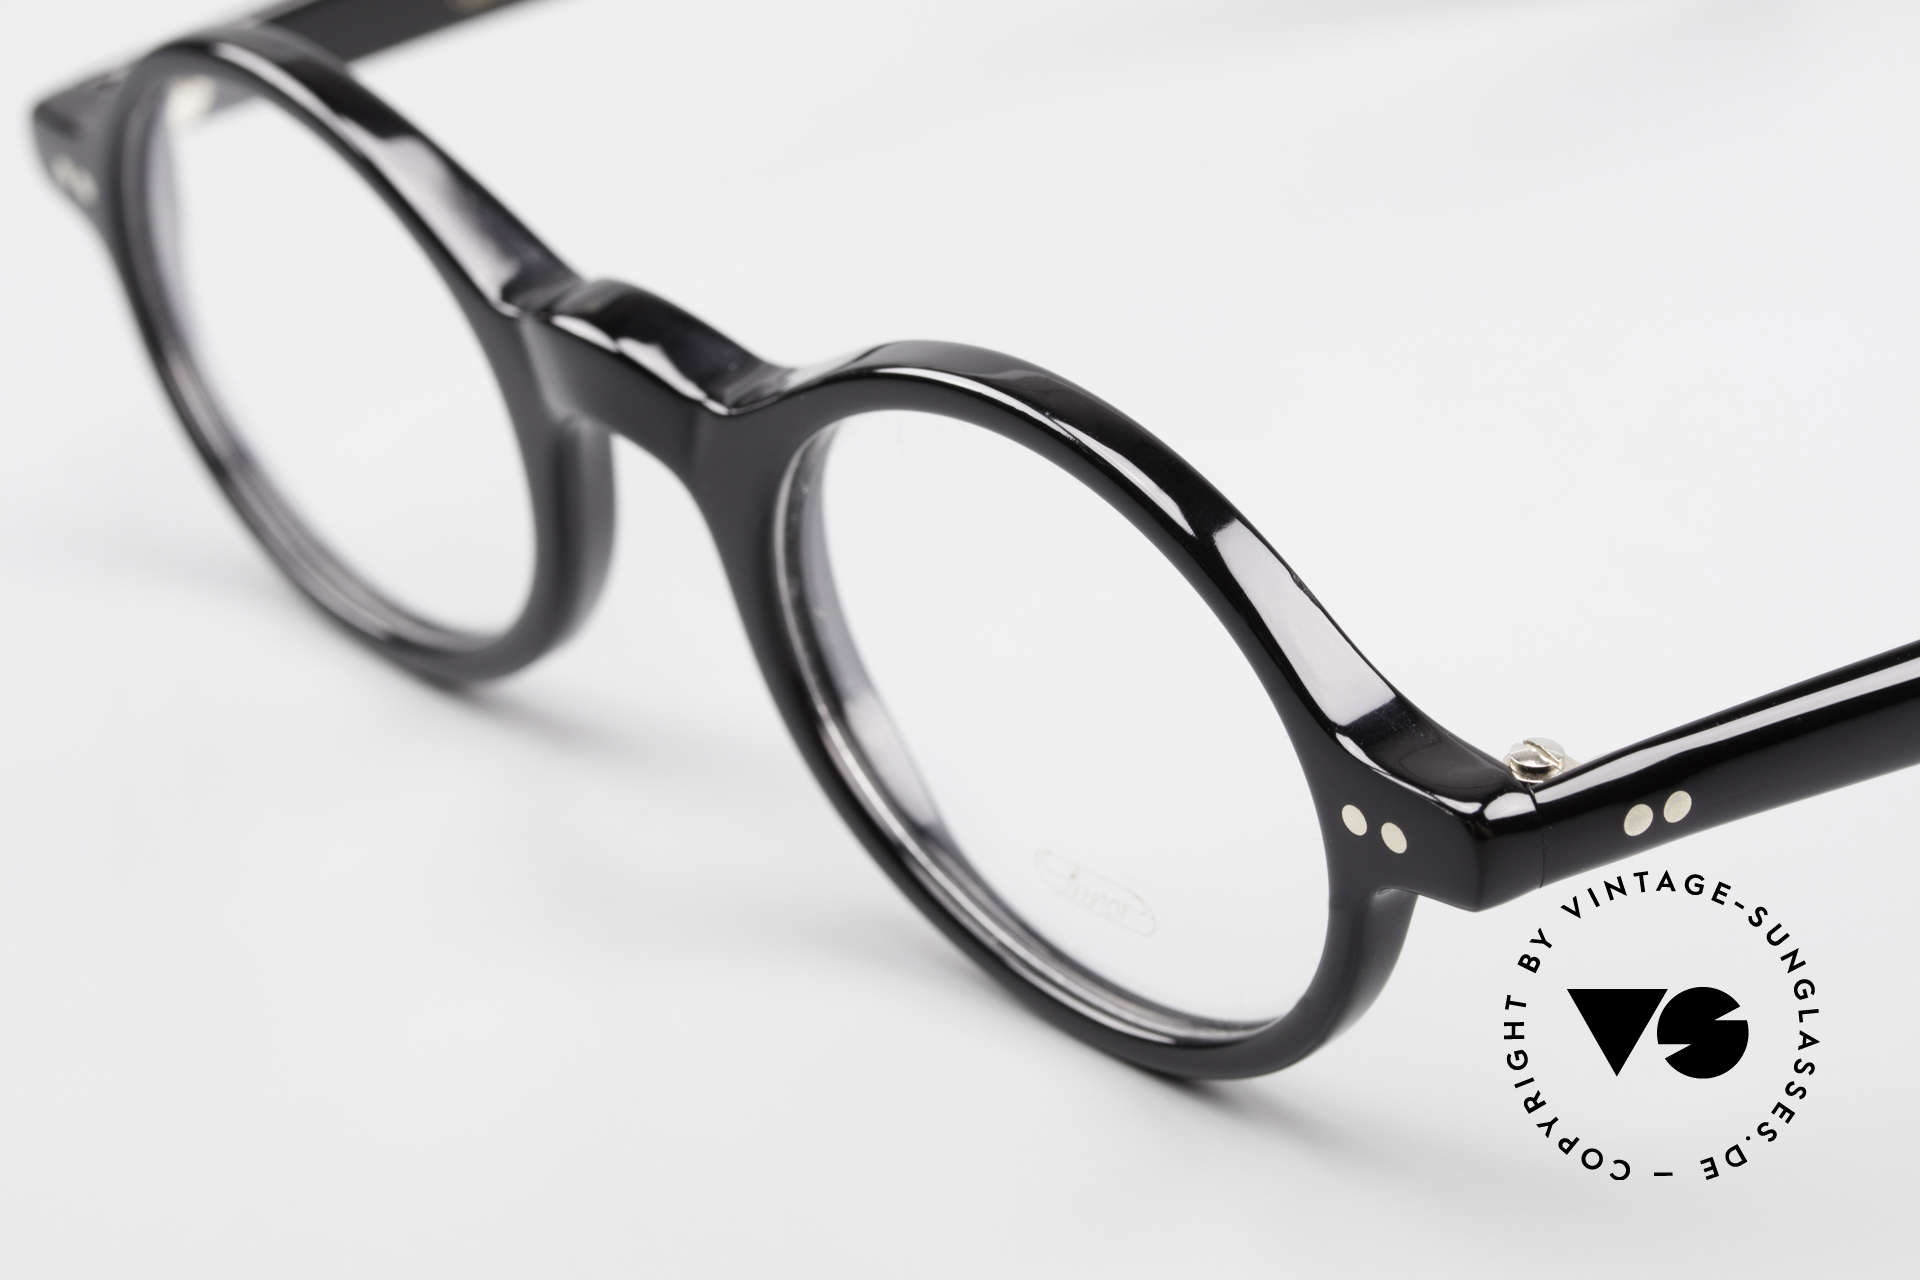 Lunor A52 Oval Eyeglasses Black Acetate, 100% made in Germany, hand-polished, a true CLASSIC, Made for Men and Women